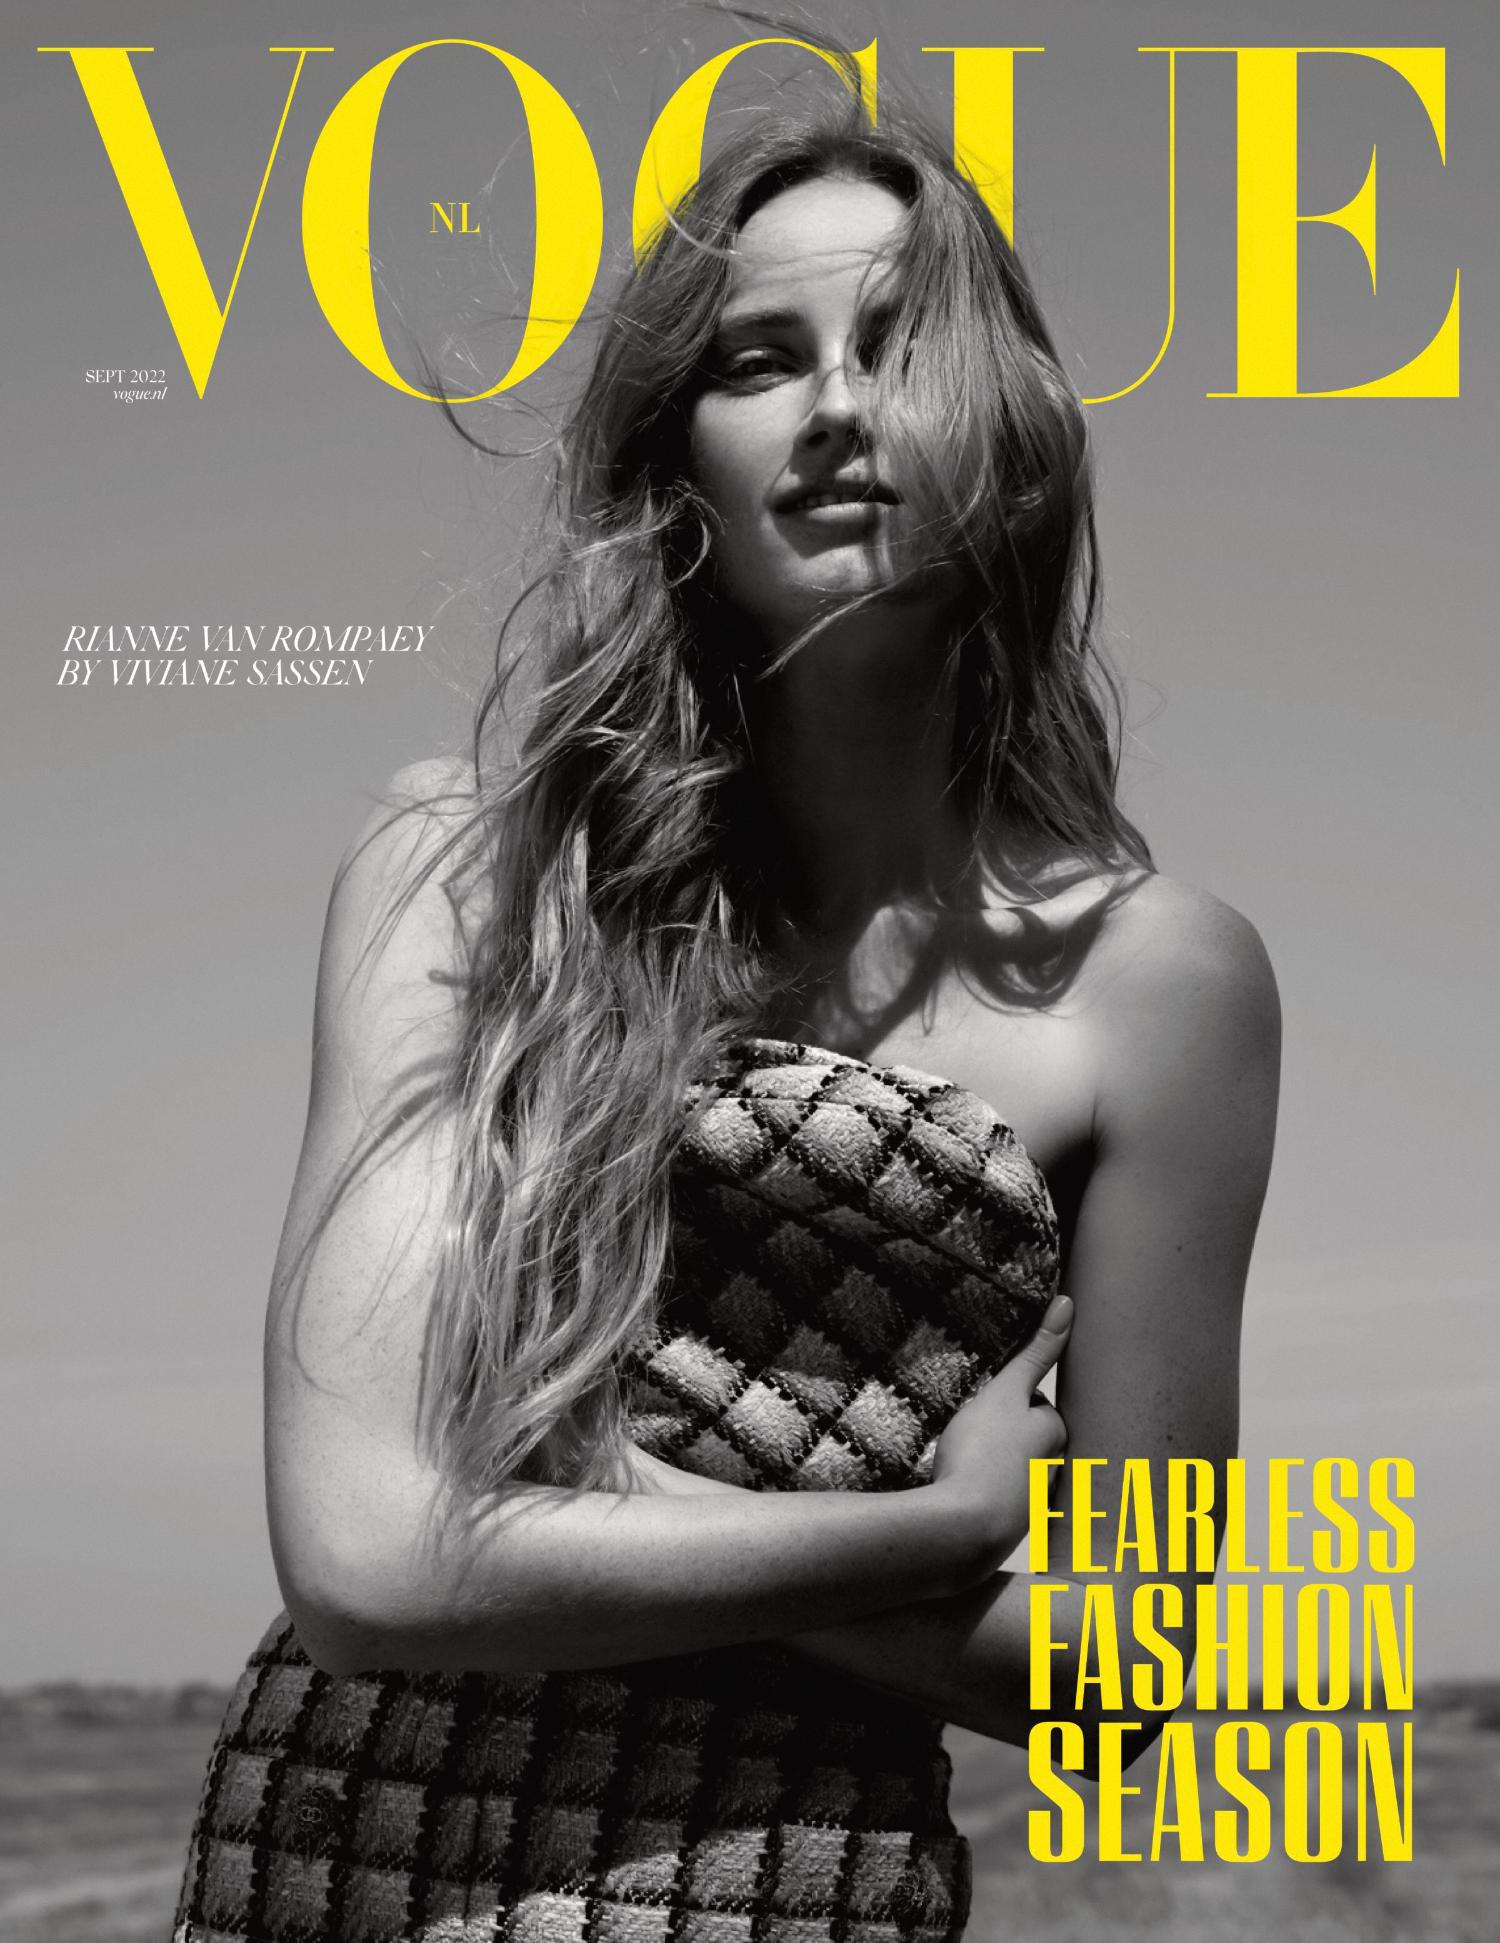 Fearless Fashion Season Issue: Rianne van Rompaey Covers Vogue Netherlands September 2022